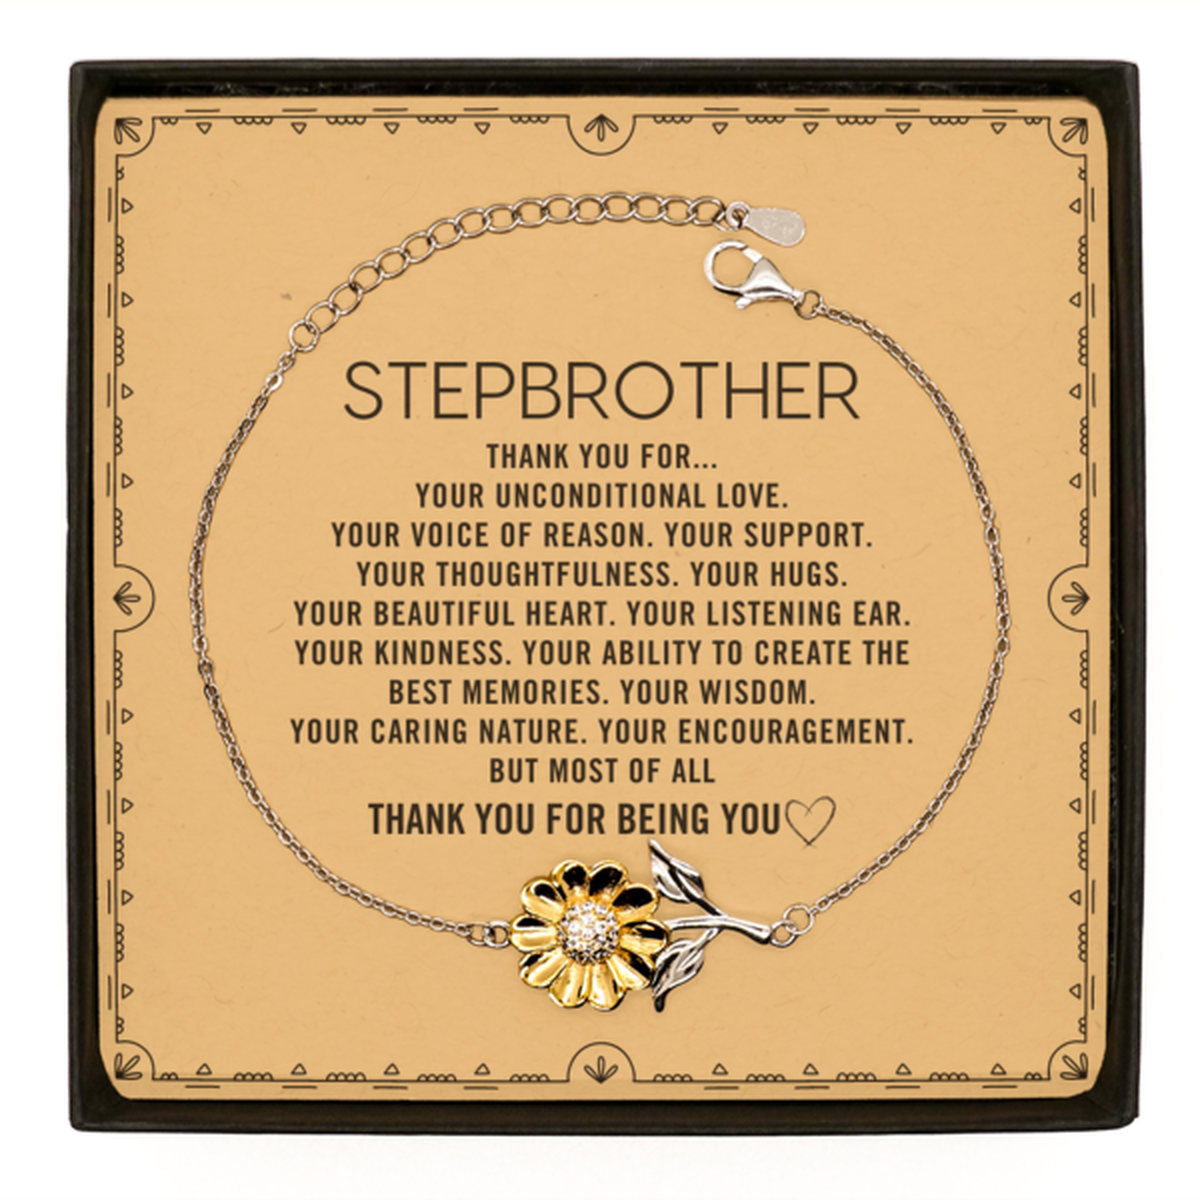 Stepbrother Sunflower Bracelet Custom, Message Card Gifts For Stepbrother Christmas Graduation Birthday Gifts for Men Women Stepbrother Thank you for Your unconditional love